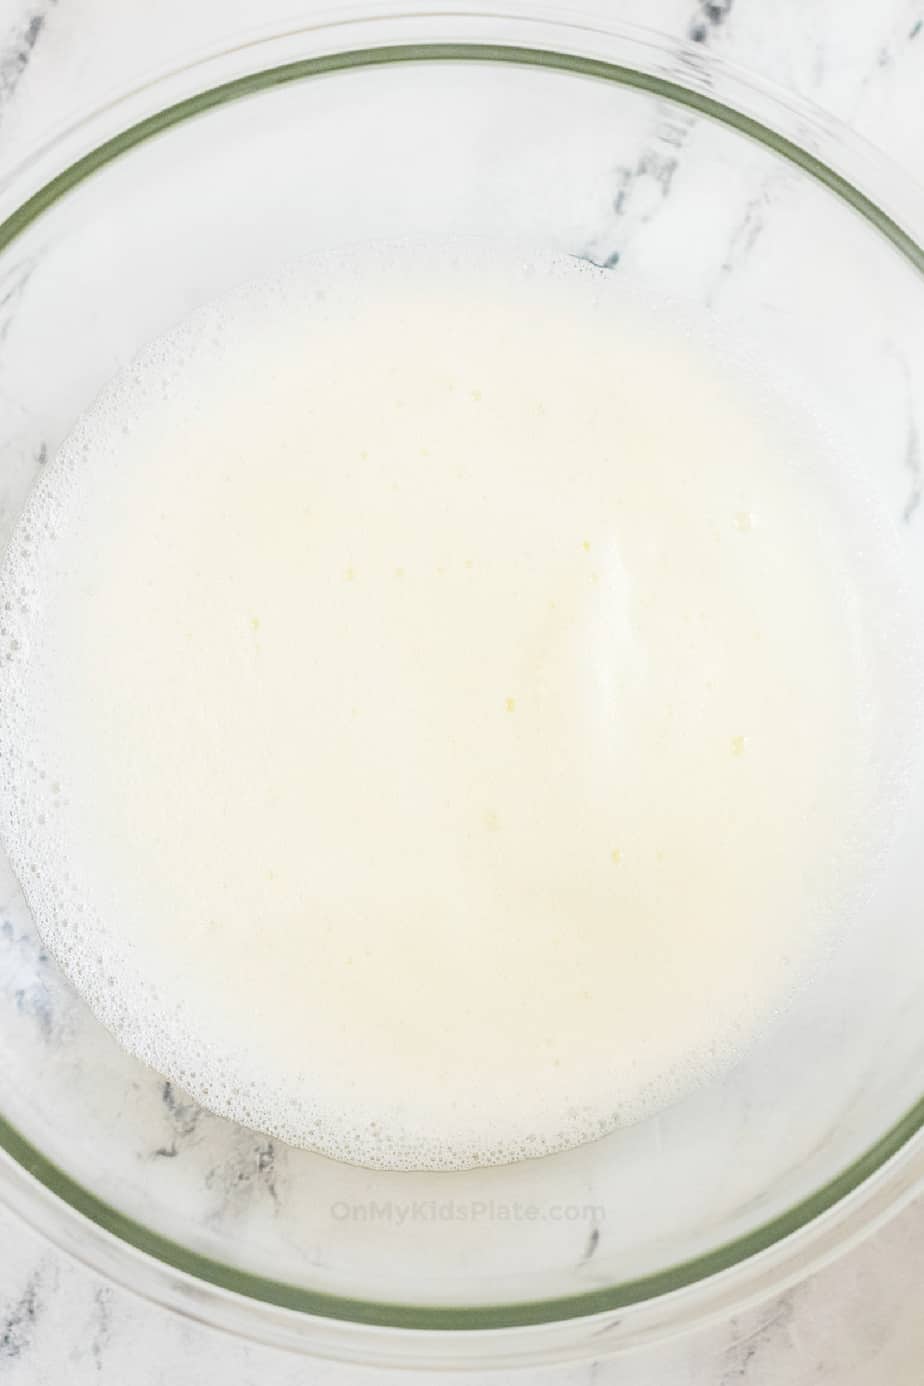 Egg whites whipped and frothy in a bowl